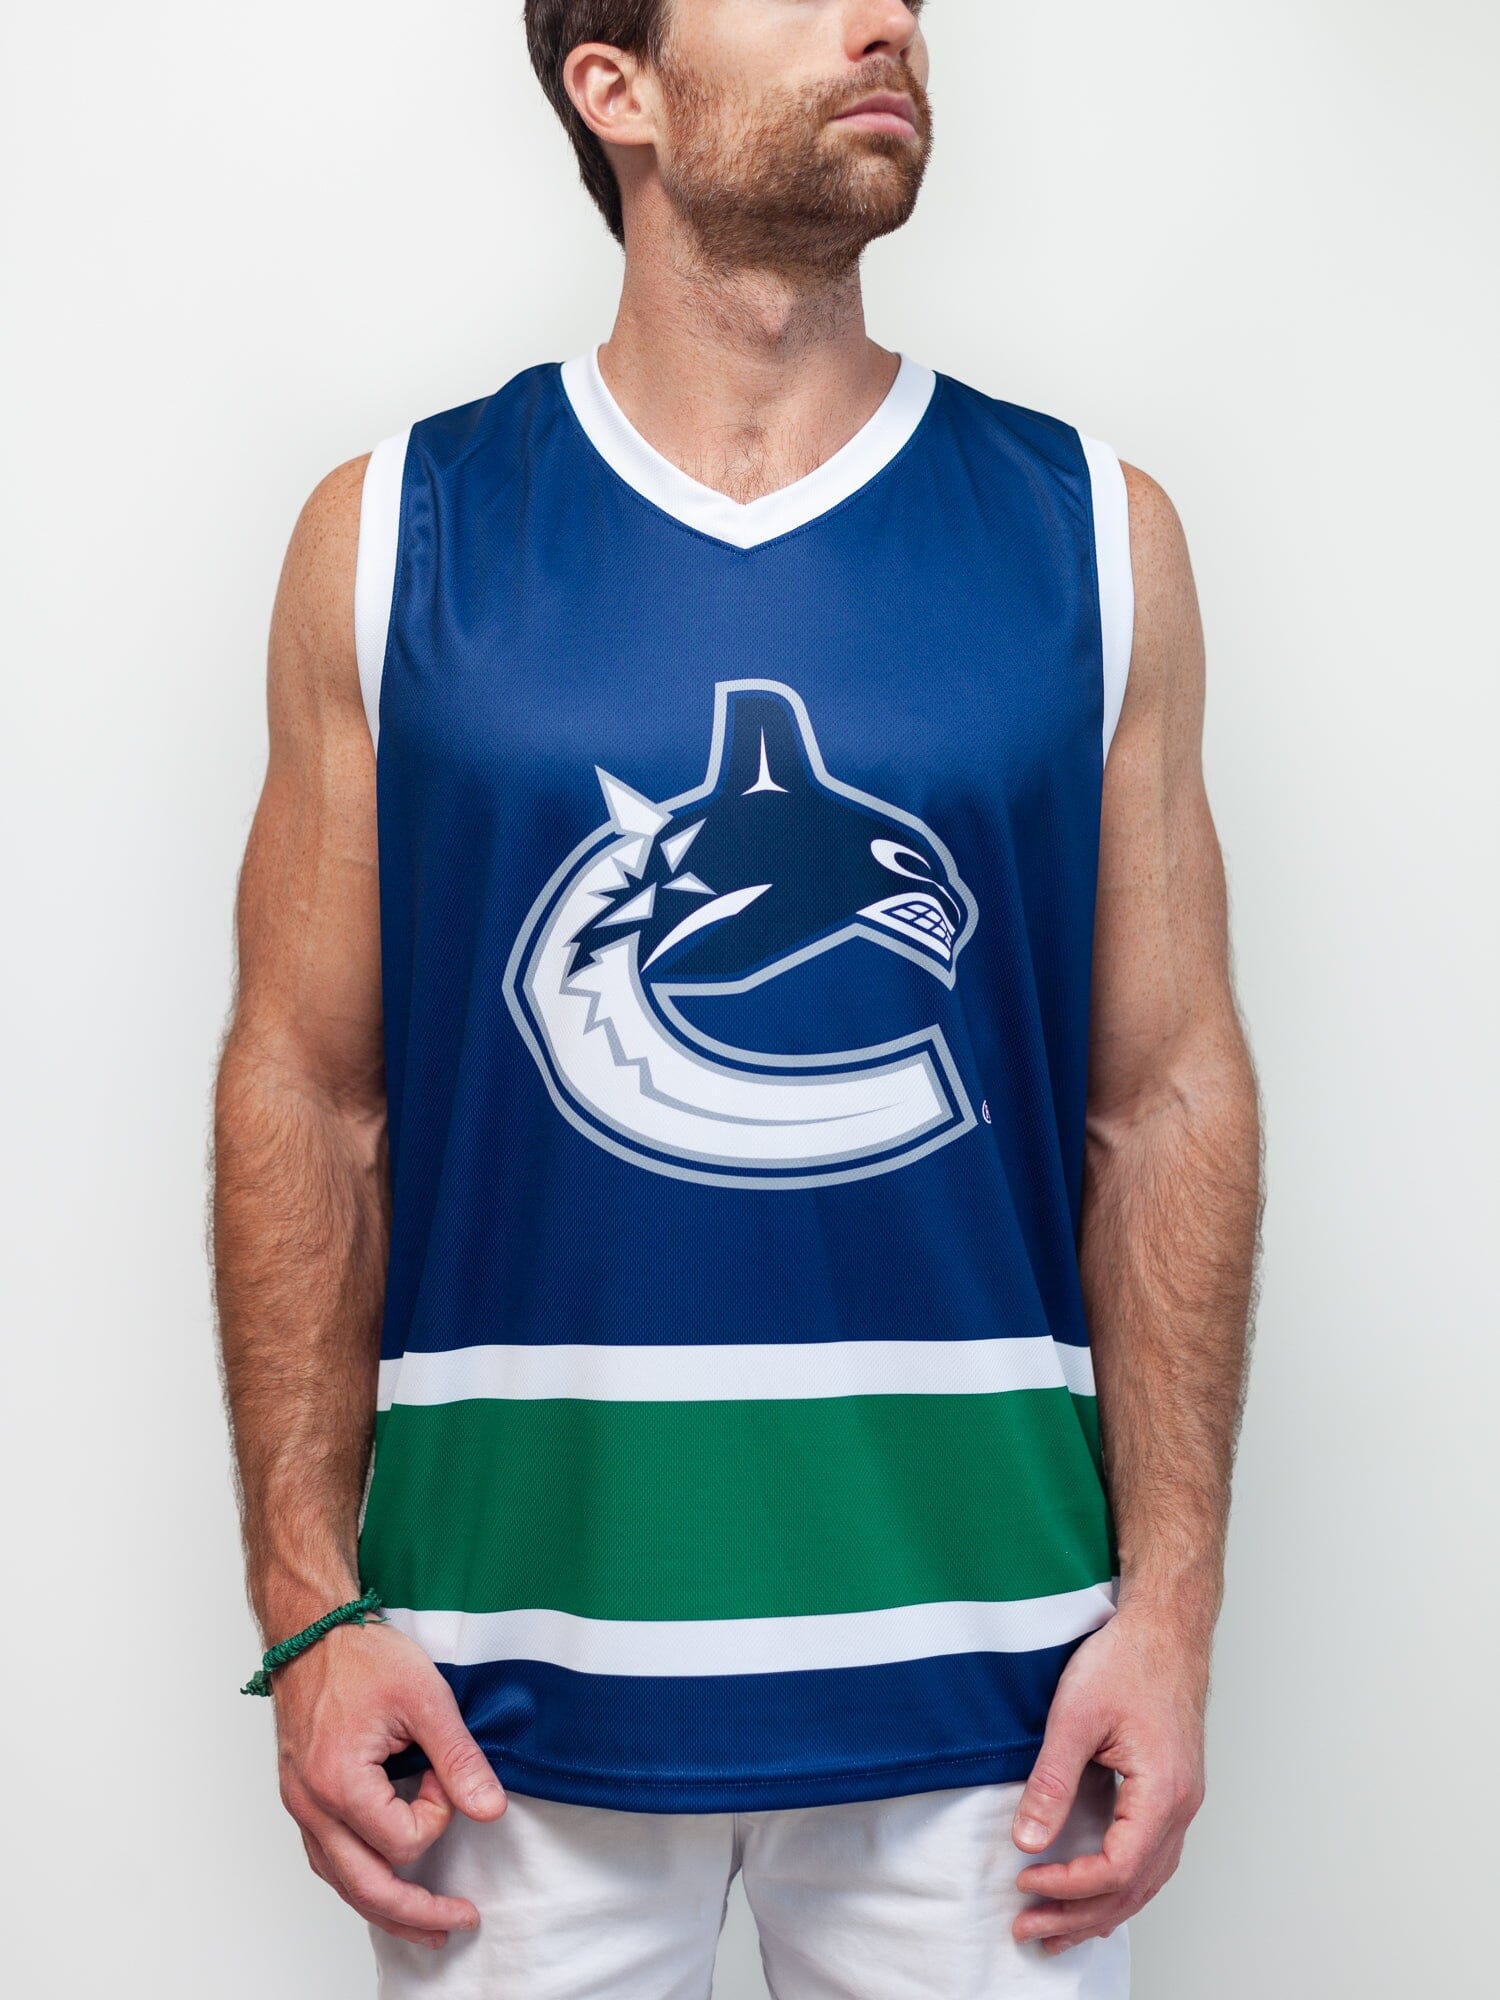 Vancouver Canucks Skate Logo Name & Number T-shirts - The Sports Exchange